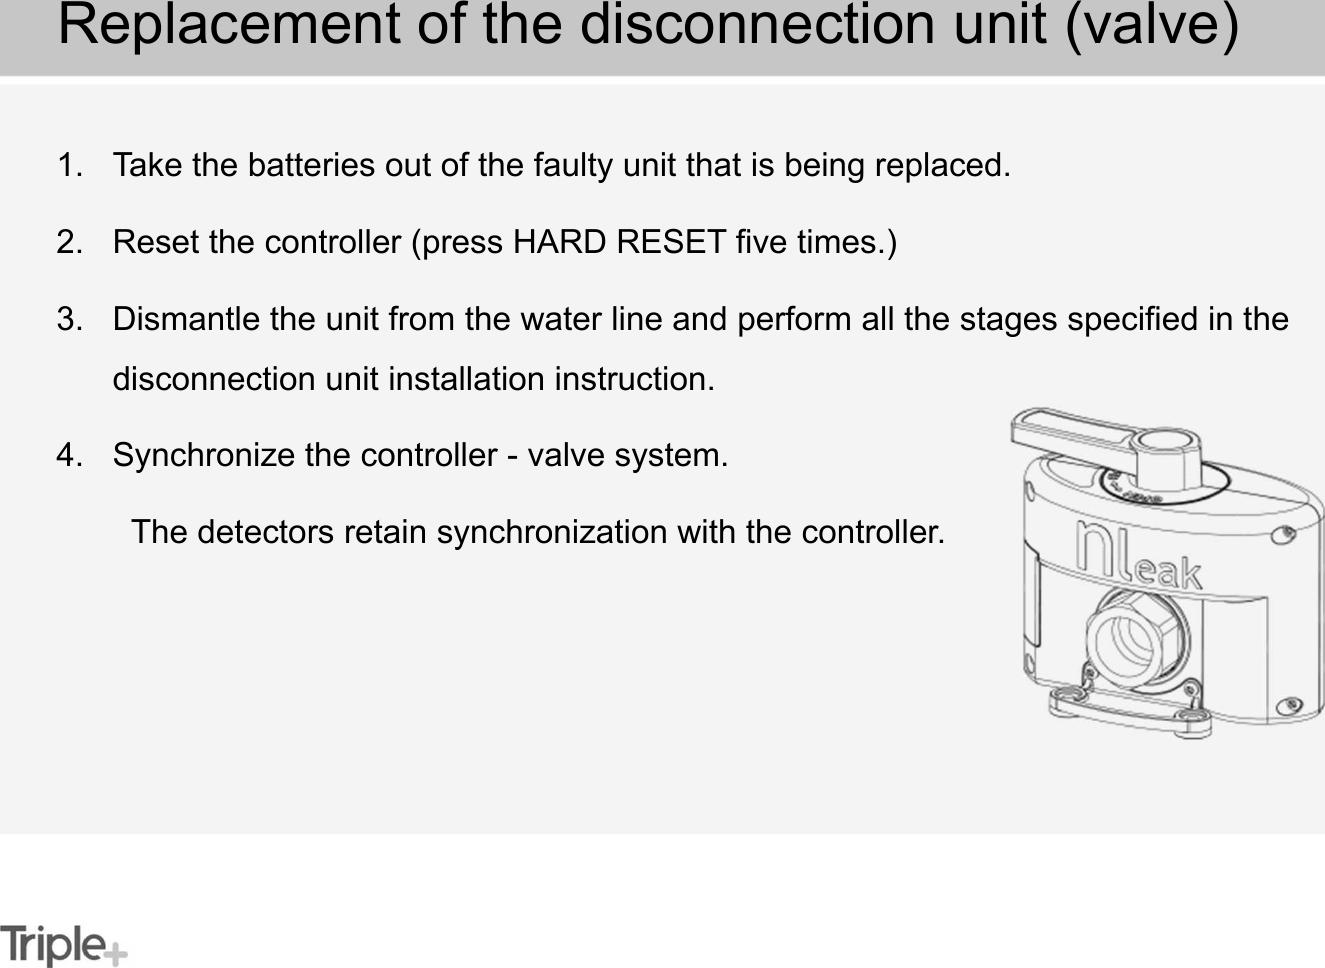 1. Take the batteries out of the faulty unit that is being replaced.2. Reset the controller (press HARD RESET five times.)3. Dismantle the unit from the water line and perform all the stages specified in the disconnection unit installation instruction.4. Synchronize the controller - valve system. The detectors retain synchronization with the controller.Replacement of the disconnection unit (valve)